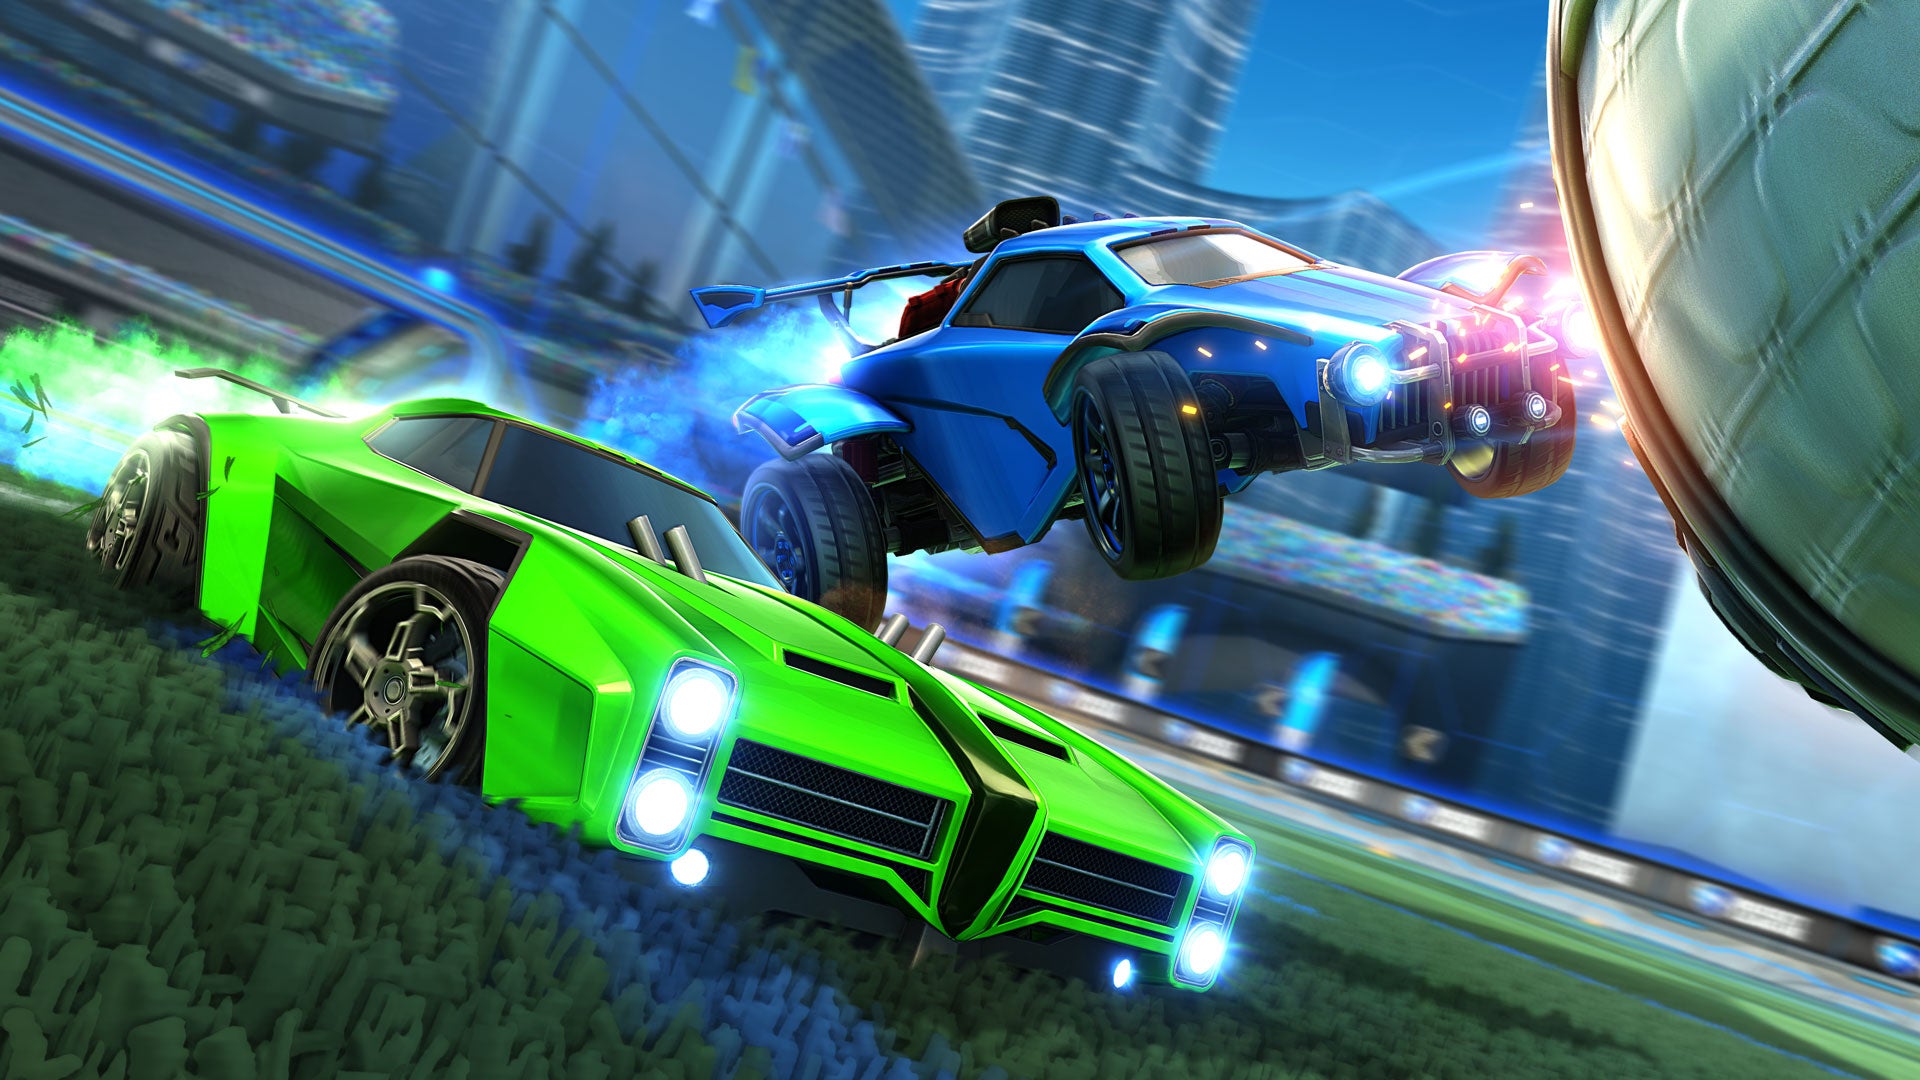 Play Rocket League on Xbox Series X, Series S, and PlayStation 5